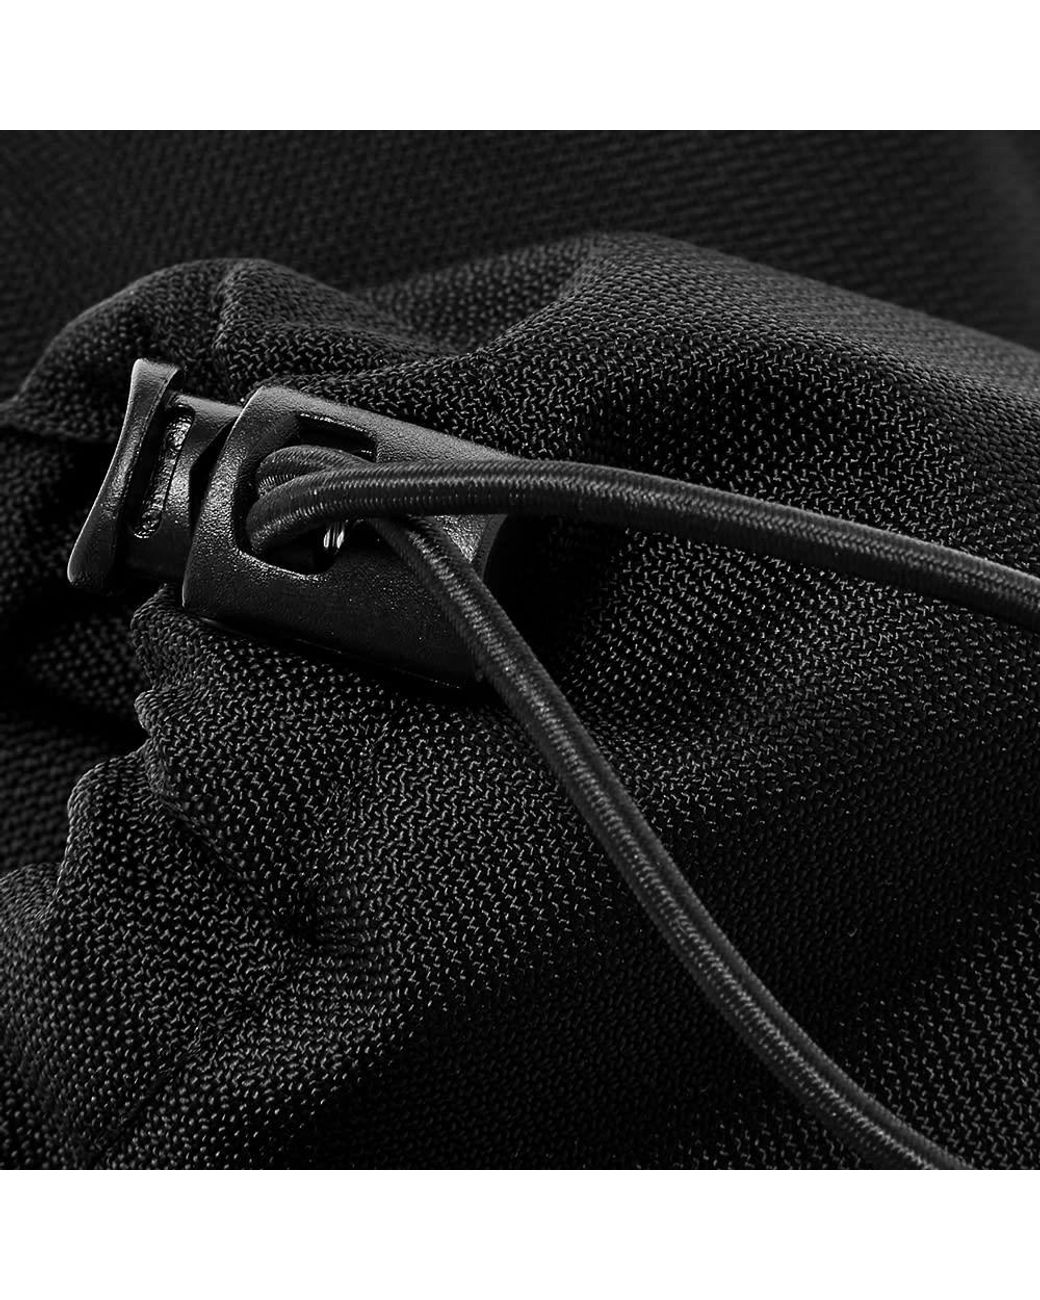 size? - The Carhartt WIP Delta Belt Bag. Available online and in